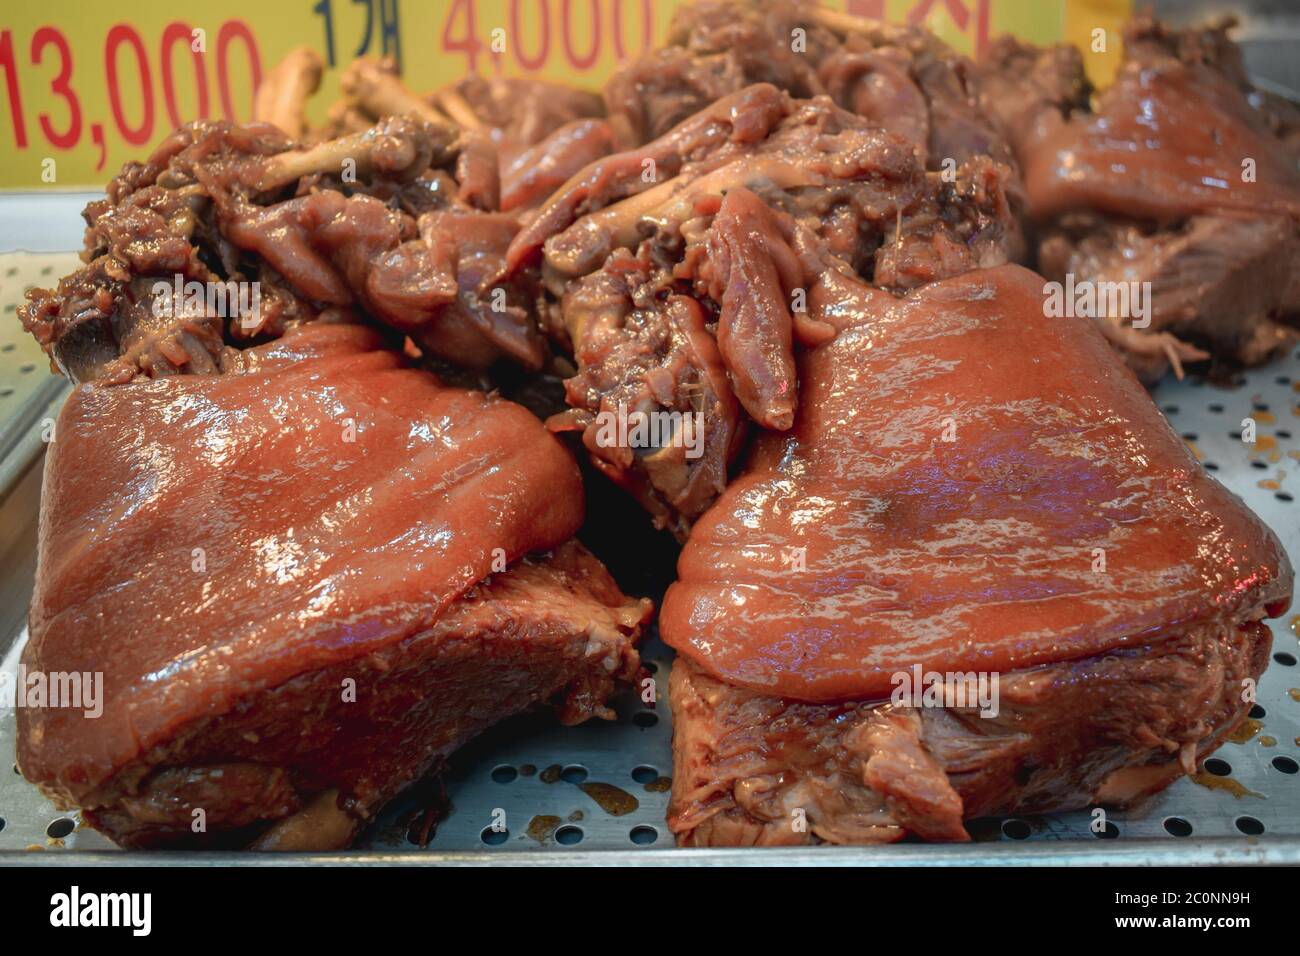 Roasted pork knuckles sold on a street food market in Seoul South Korea Stock Photo